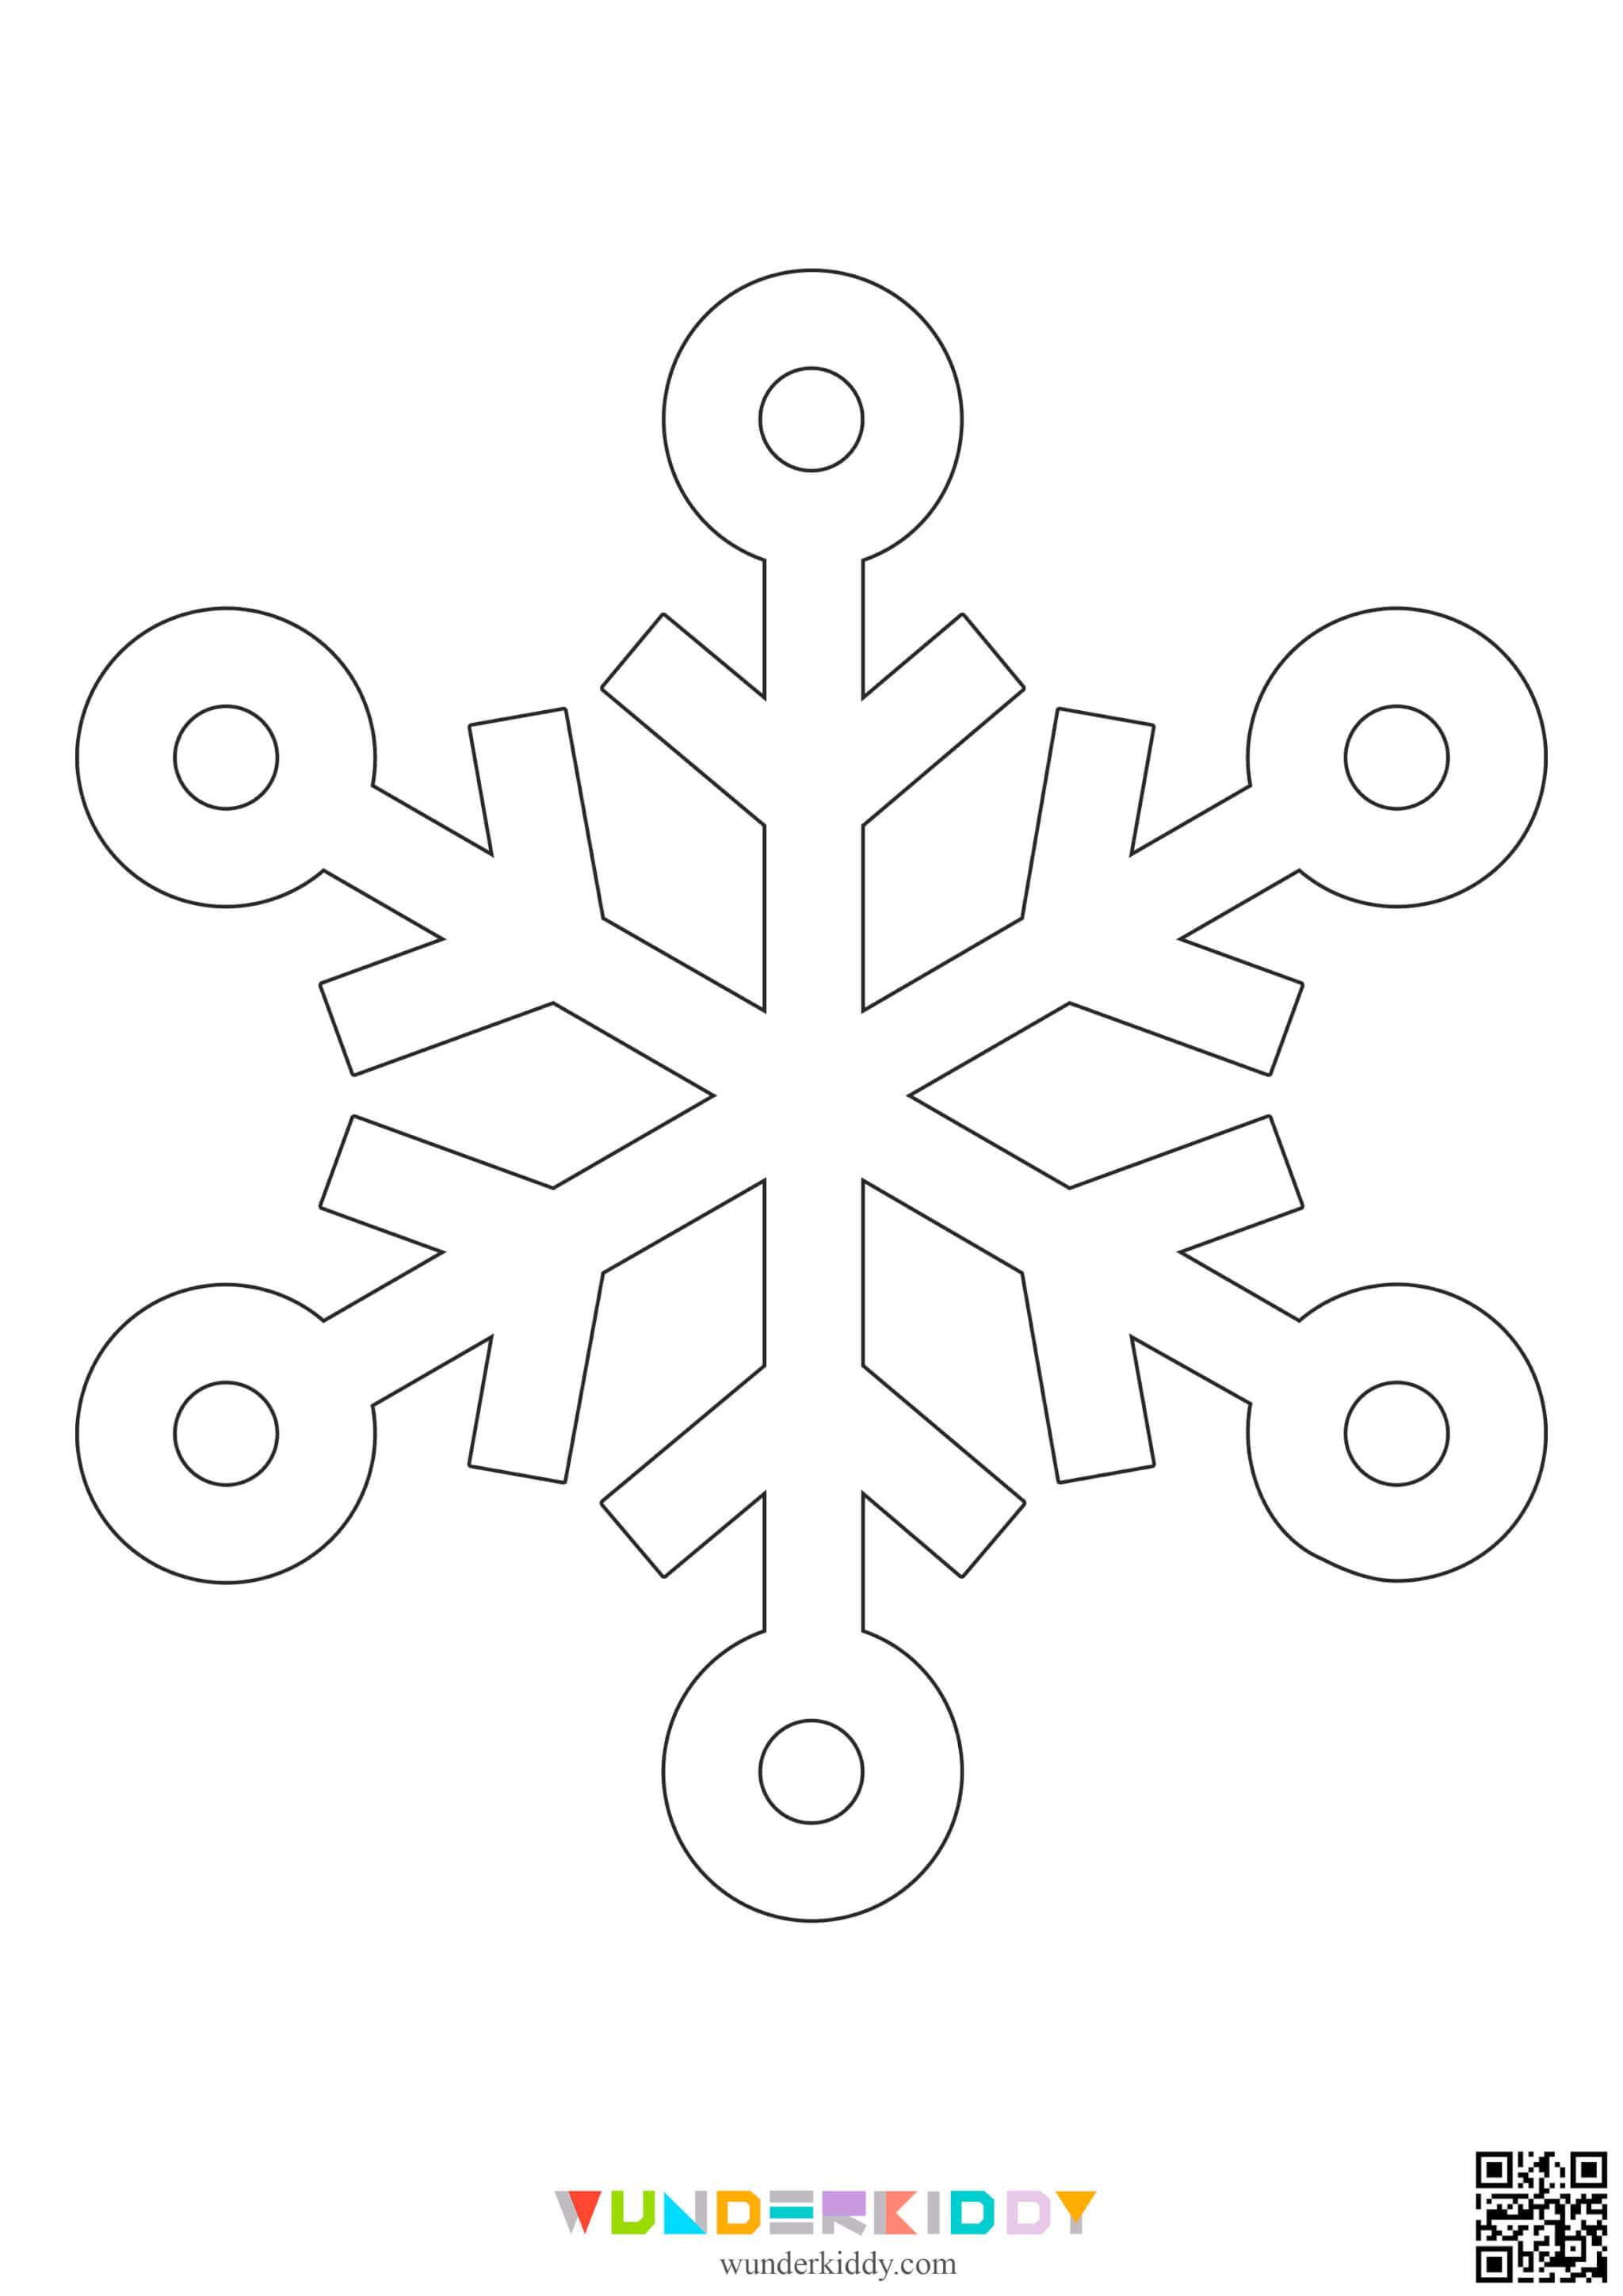 Snowflakes Template - Image 18